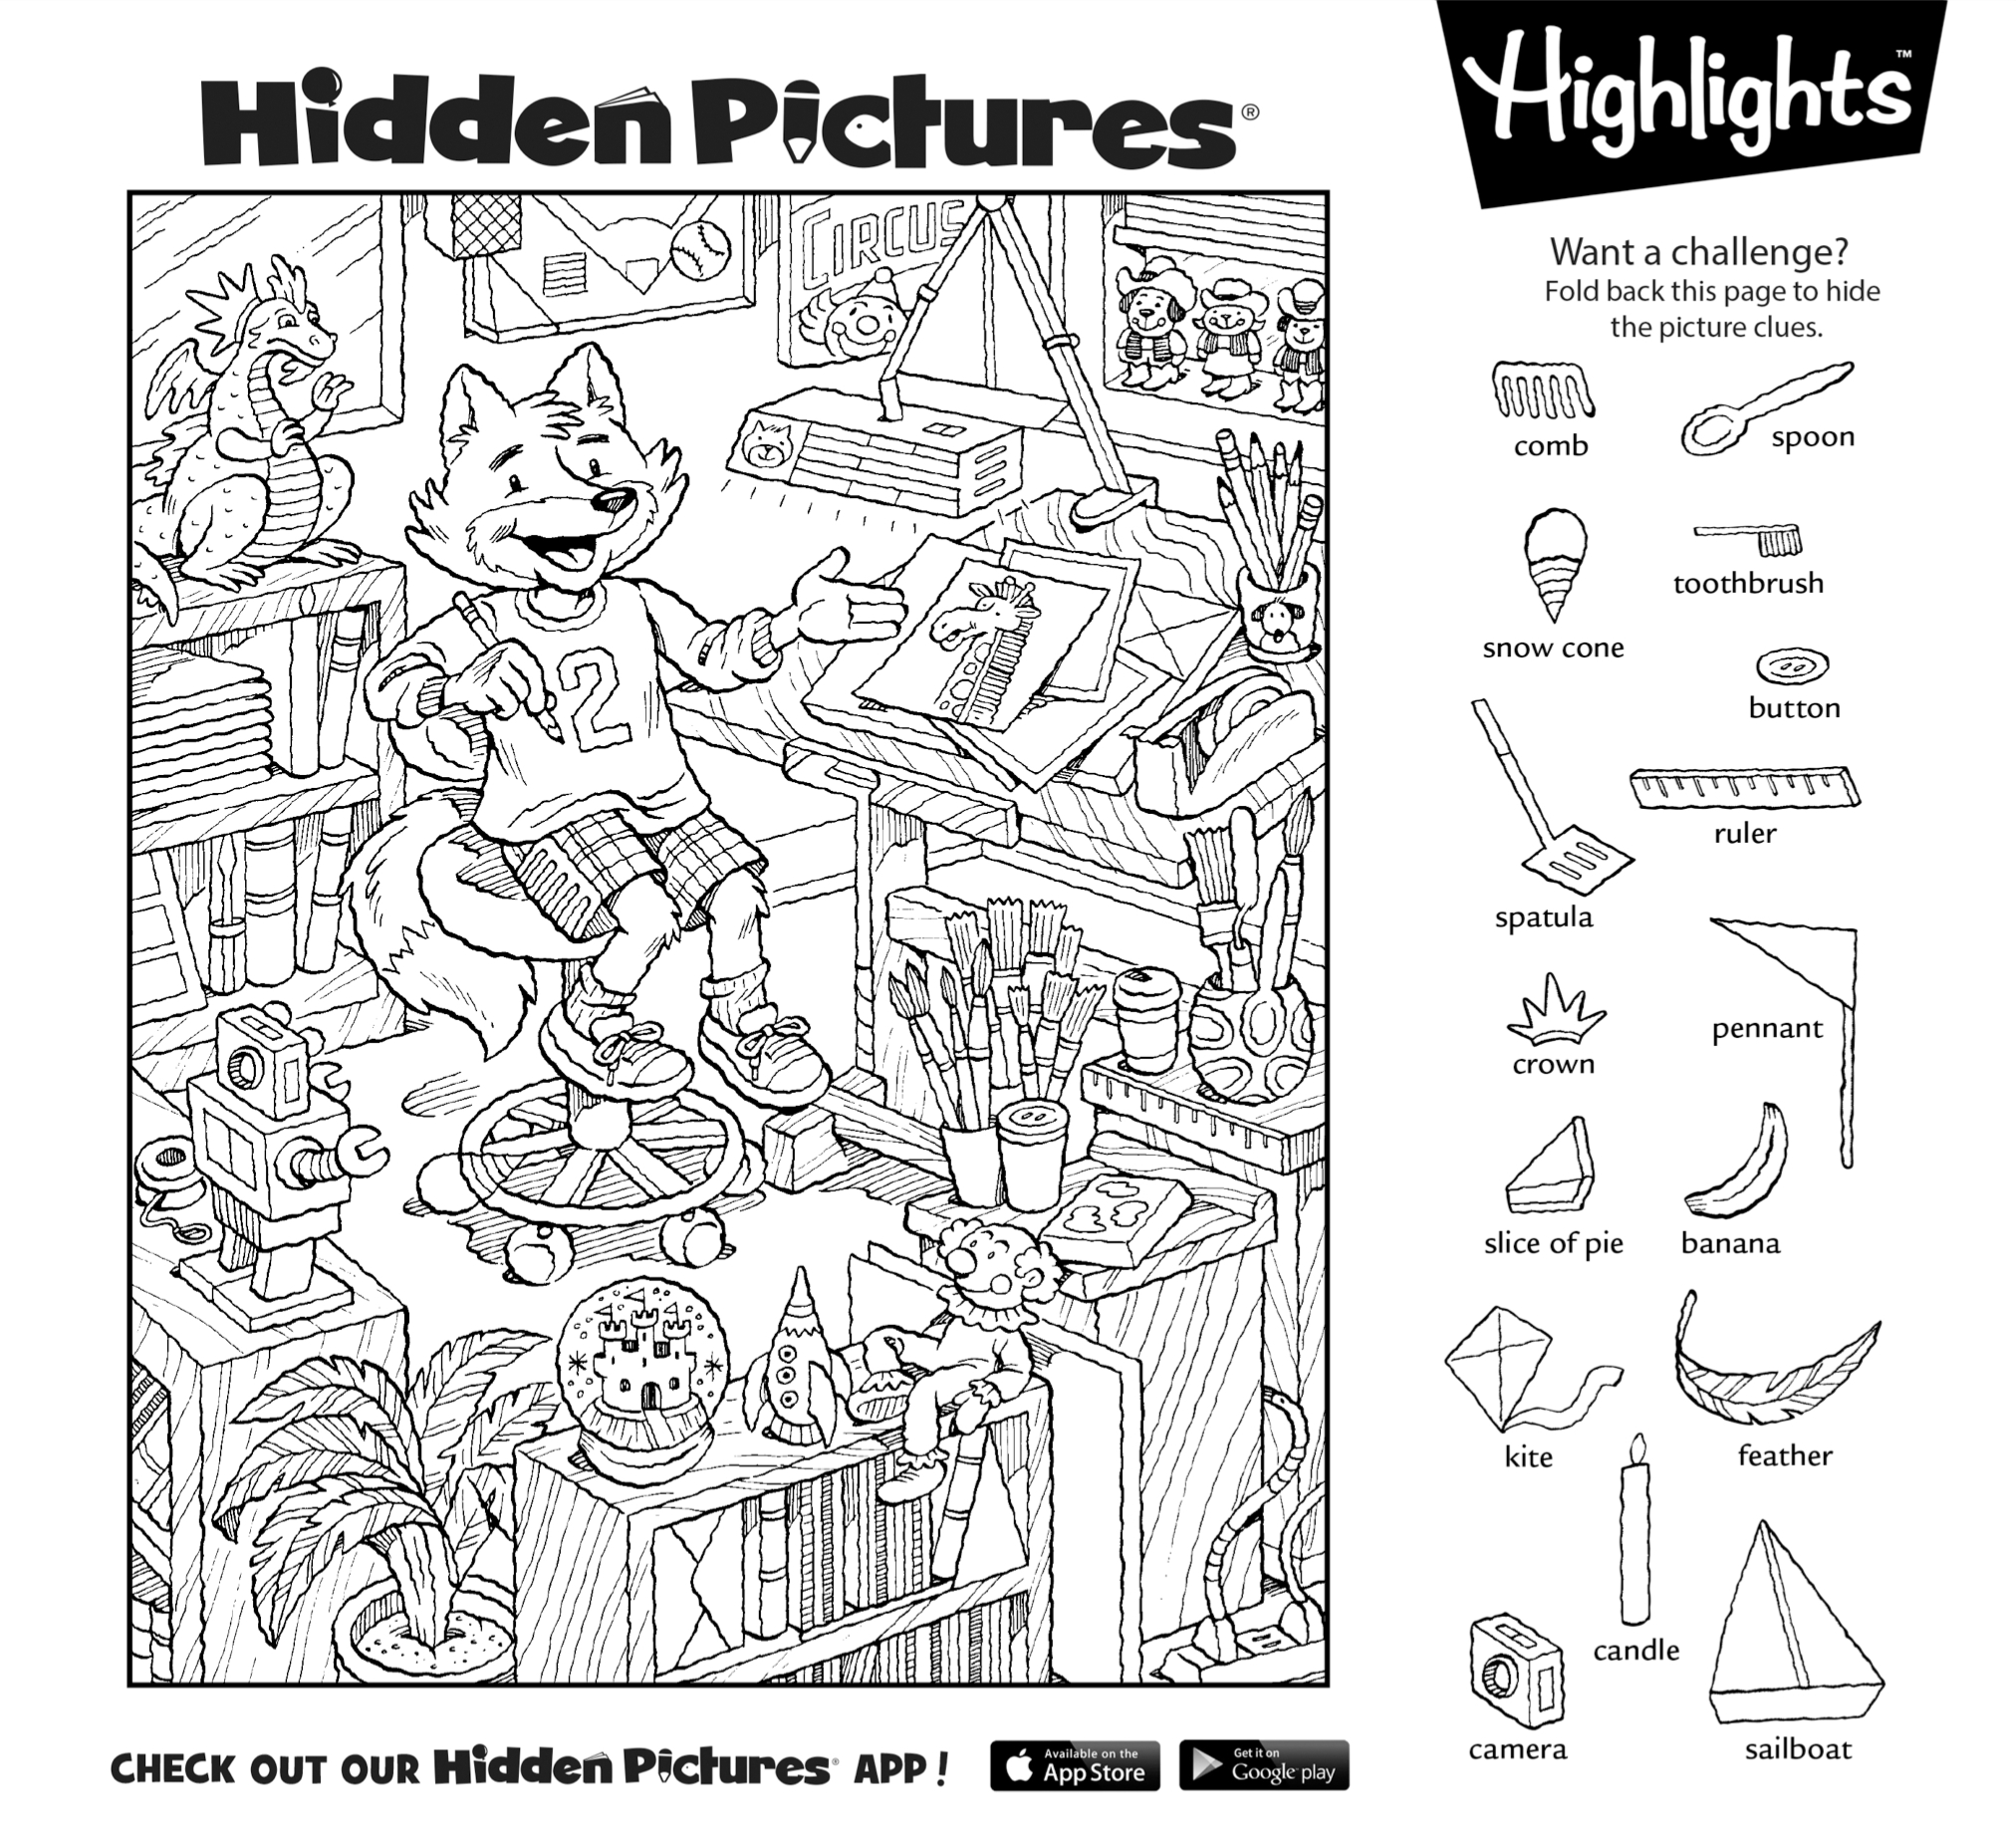 Download This Free Printable Hidden Pictures Puzzle To Share With - Free Printable Highlights Hidden Pictures